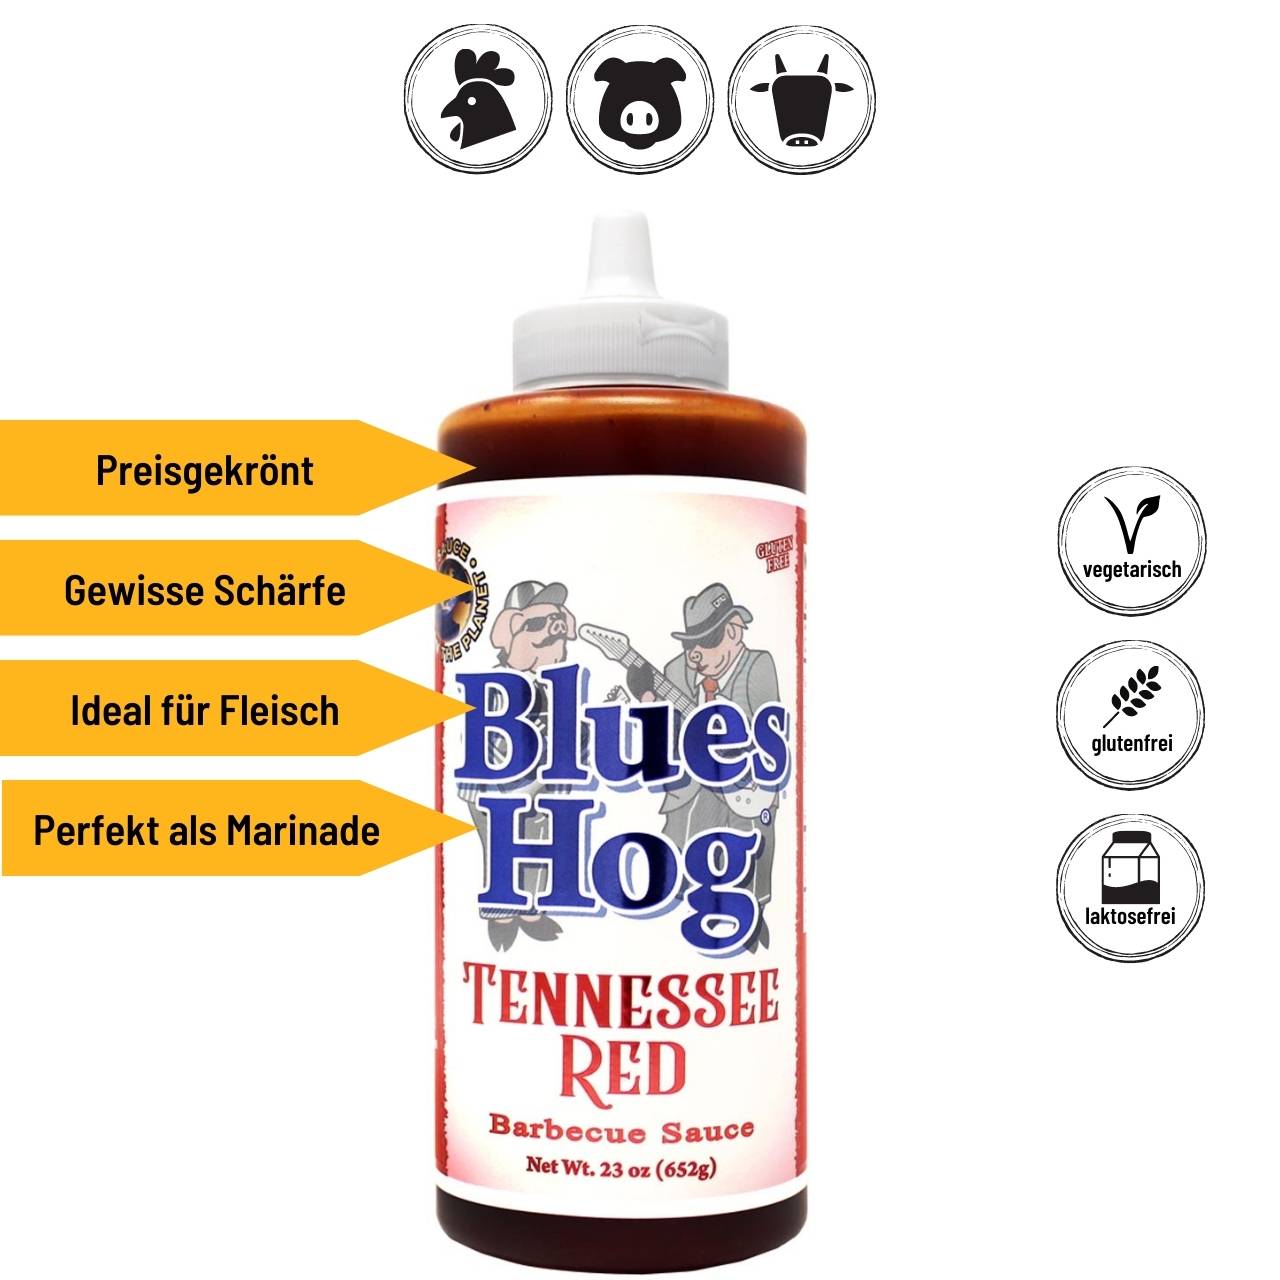 Blues Hog - Tennessee Red Sauce Squeeze Flasche